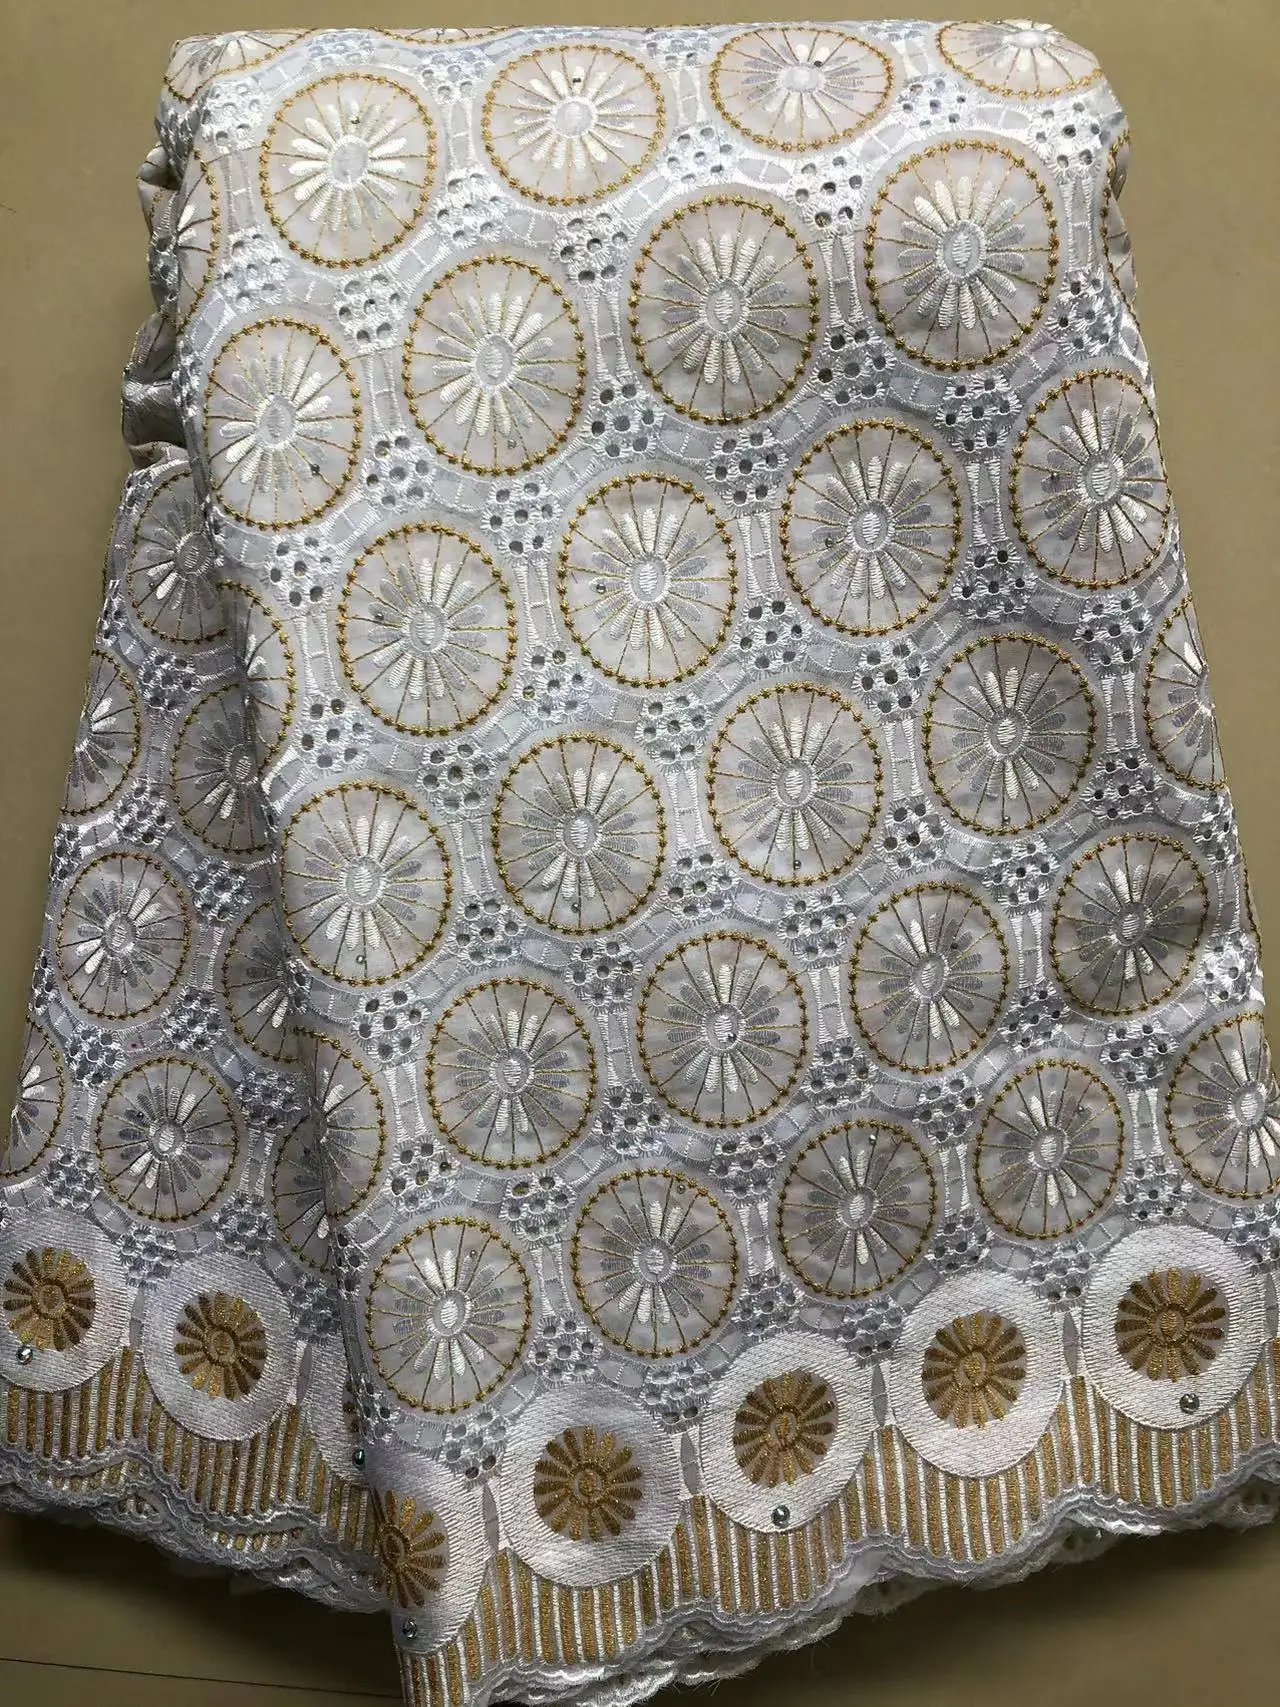 African Cotton Lace Fabric 2023 High Quality Swiss Voile Lace In Switzerland With Stones Nigerian Lace Fabrics For Wedding Dress african dry lace fabric 2022 high quality lace swiss voile lace in switzerland nigerian cotton lace fabrics for sewing ly1839